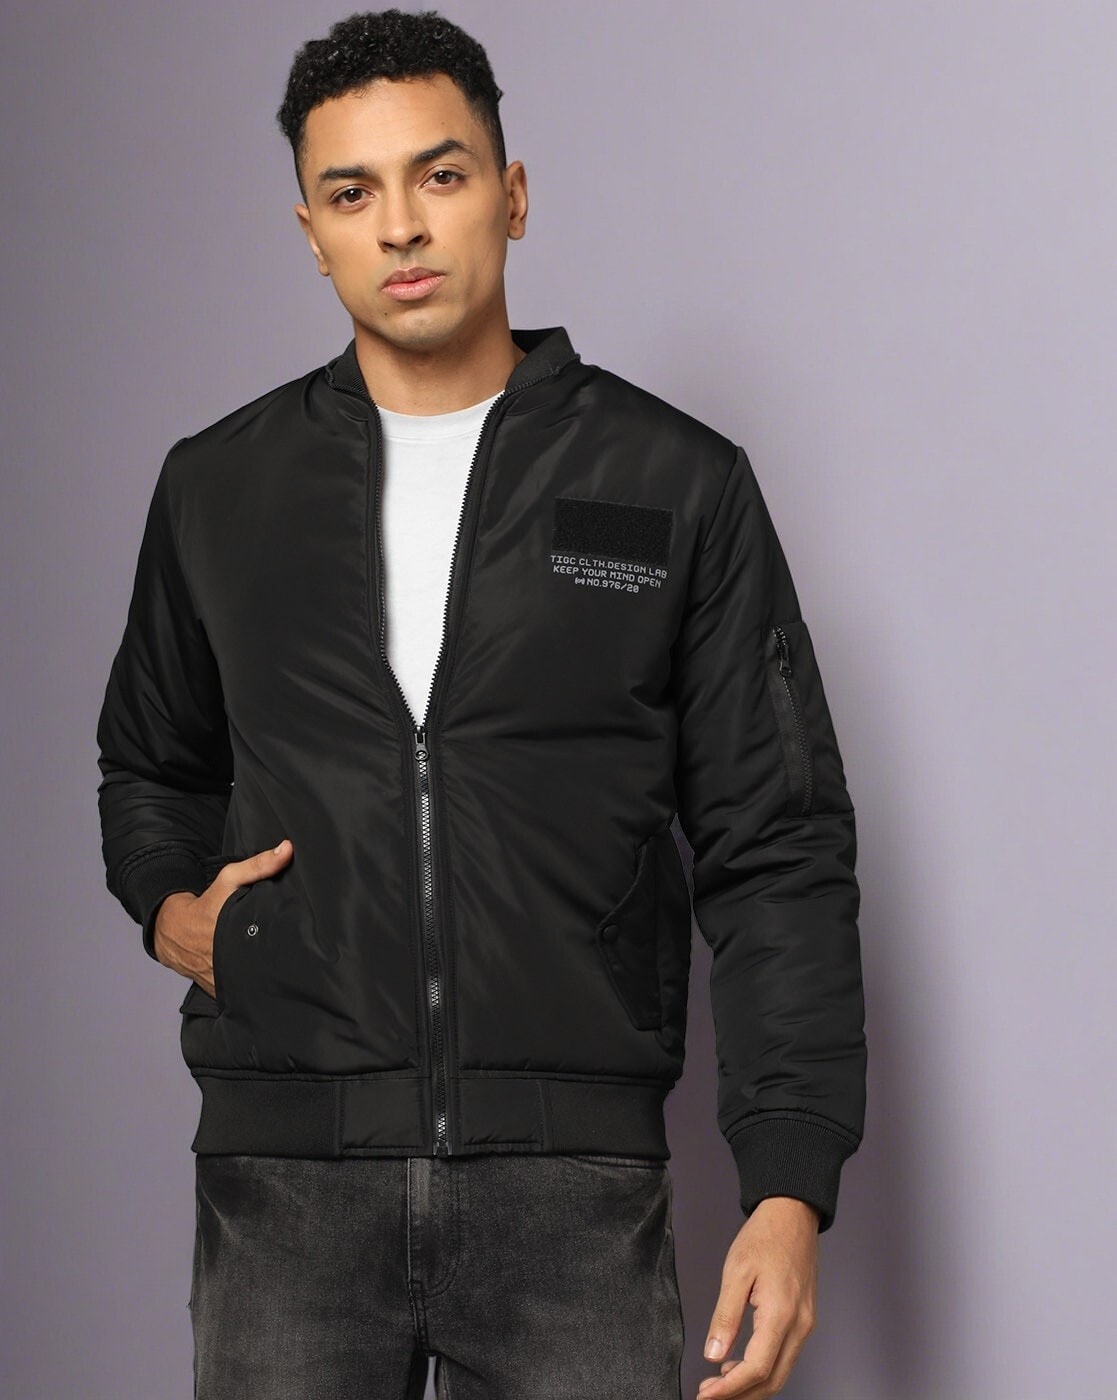 Grandwish Fashion Men Bomber Jacket Hip Hop Patch Designs Slim Fit Pilot Bomber  Jacket Coat Men Jackets Plus Size 4XL,PA573-in Jackets from Men's Clothing  & Accessories on Aliexpress.com | Alibaba Group